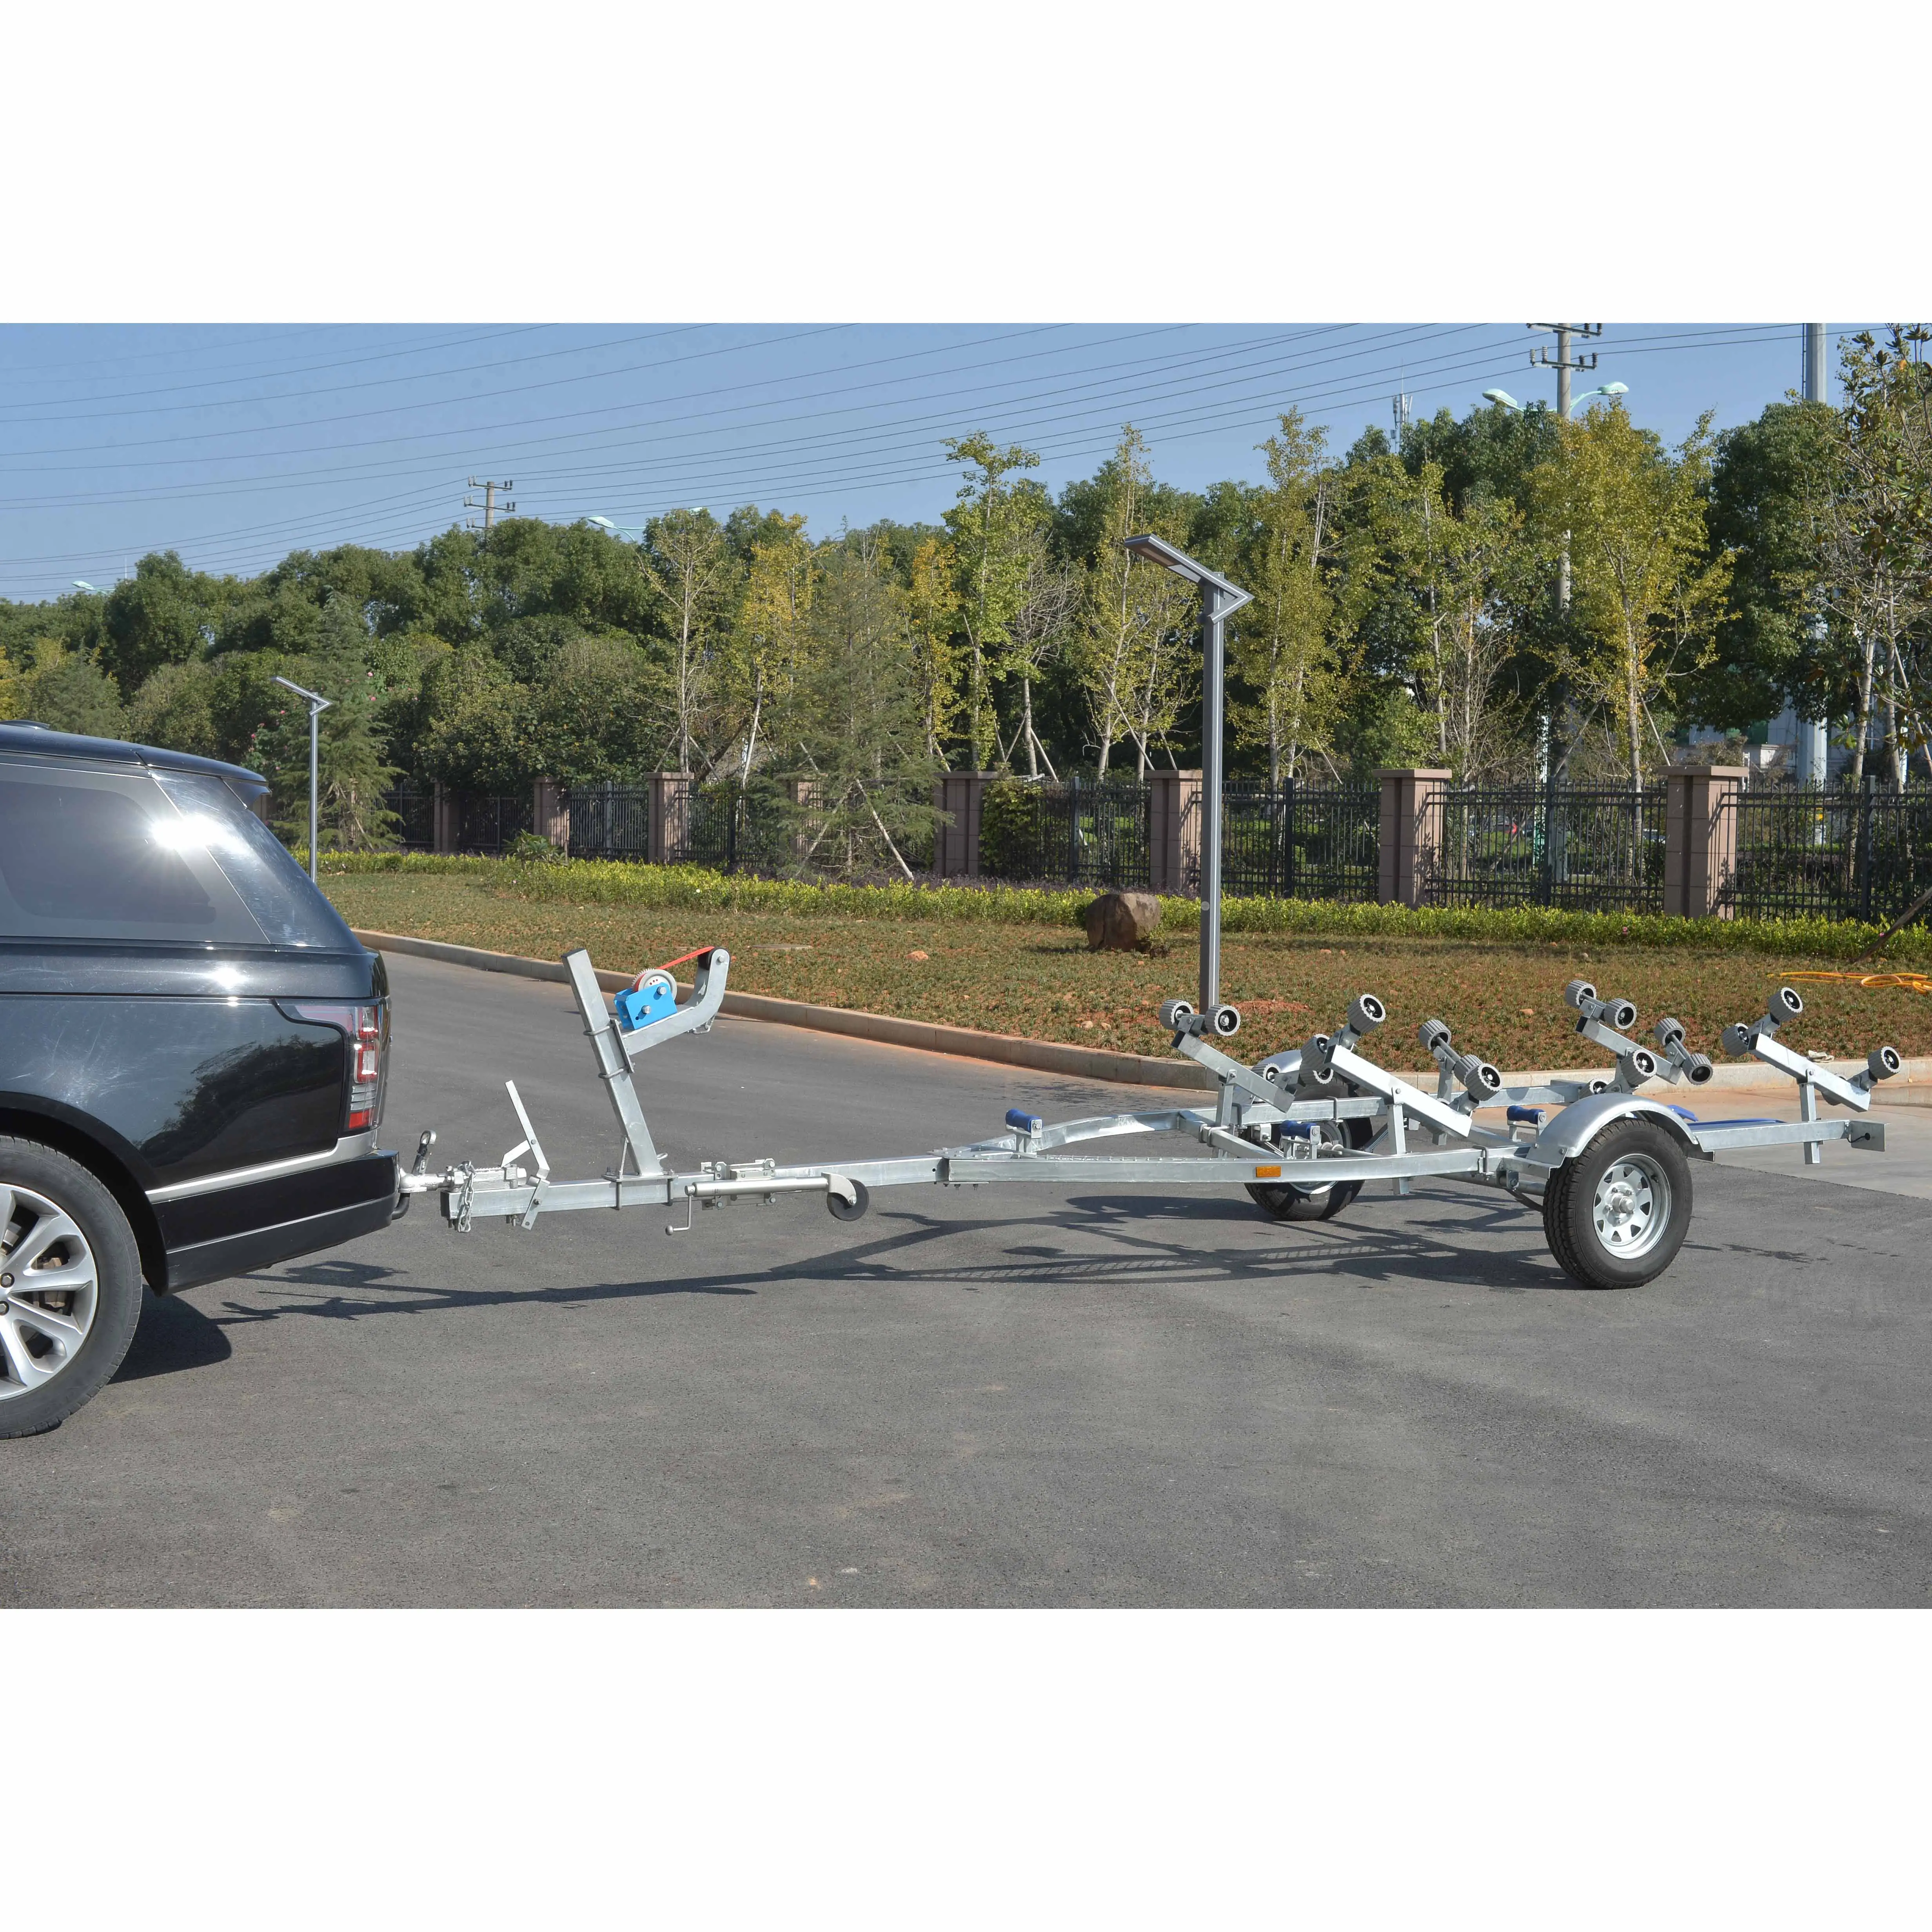 4 METRE GALVANIZED BOAT TRAILER WITH DISC BRAKES (WOBBLE ROLLERS)